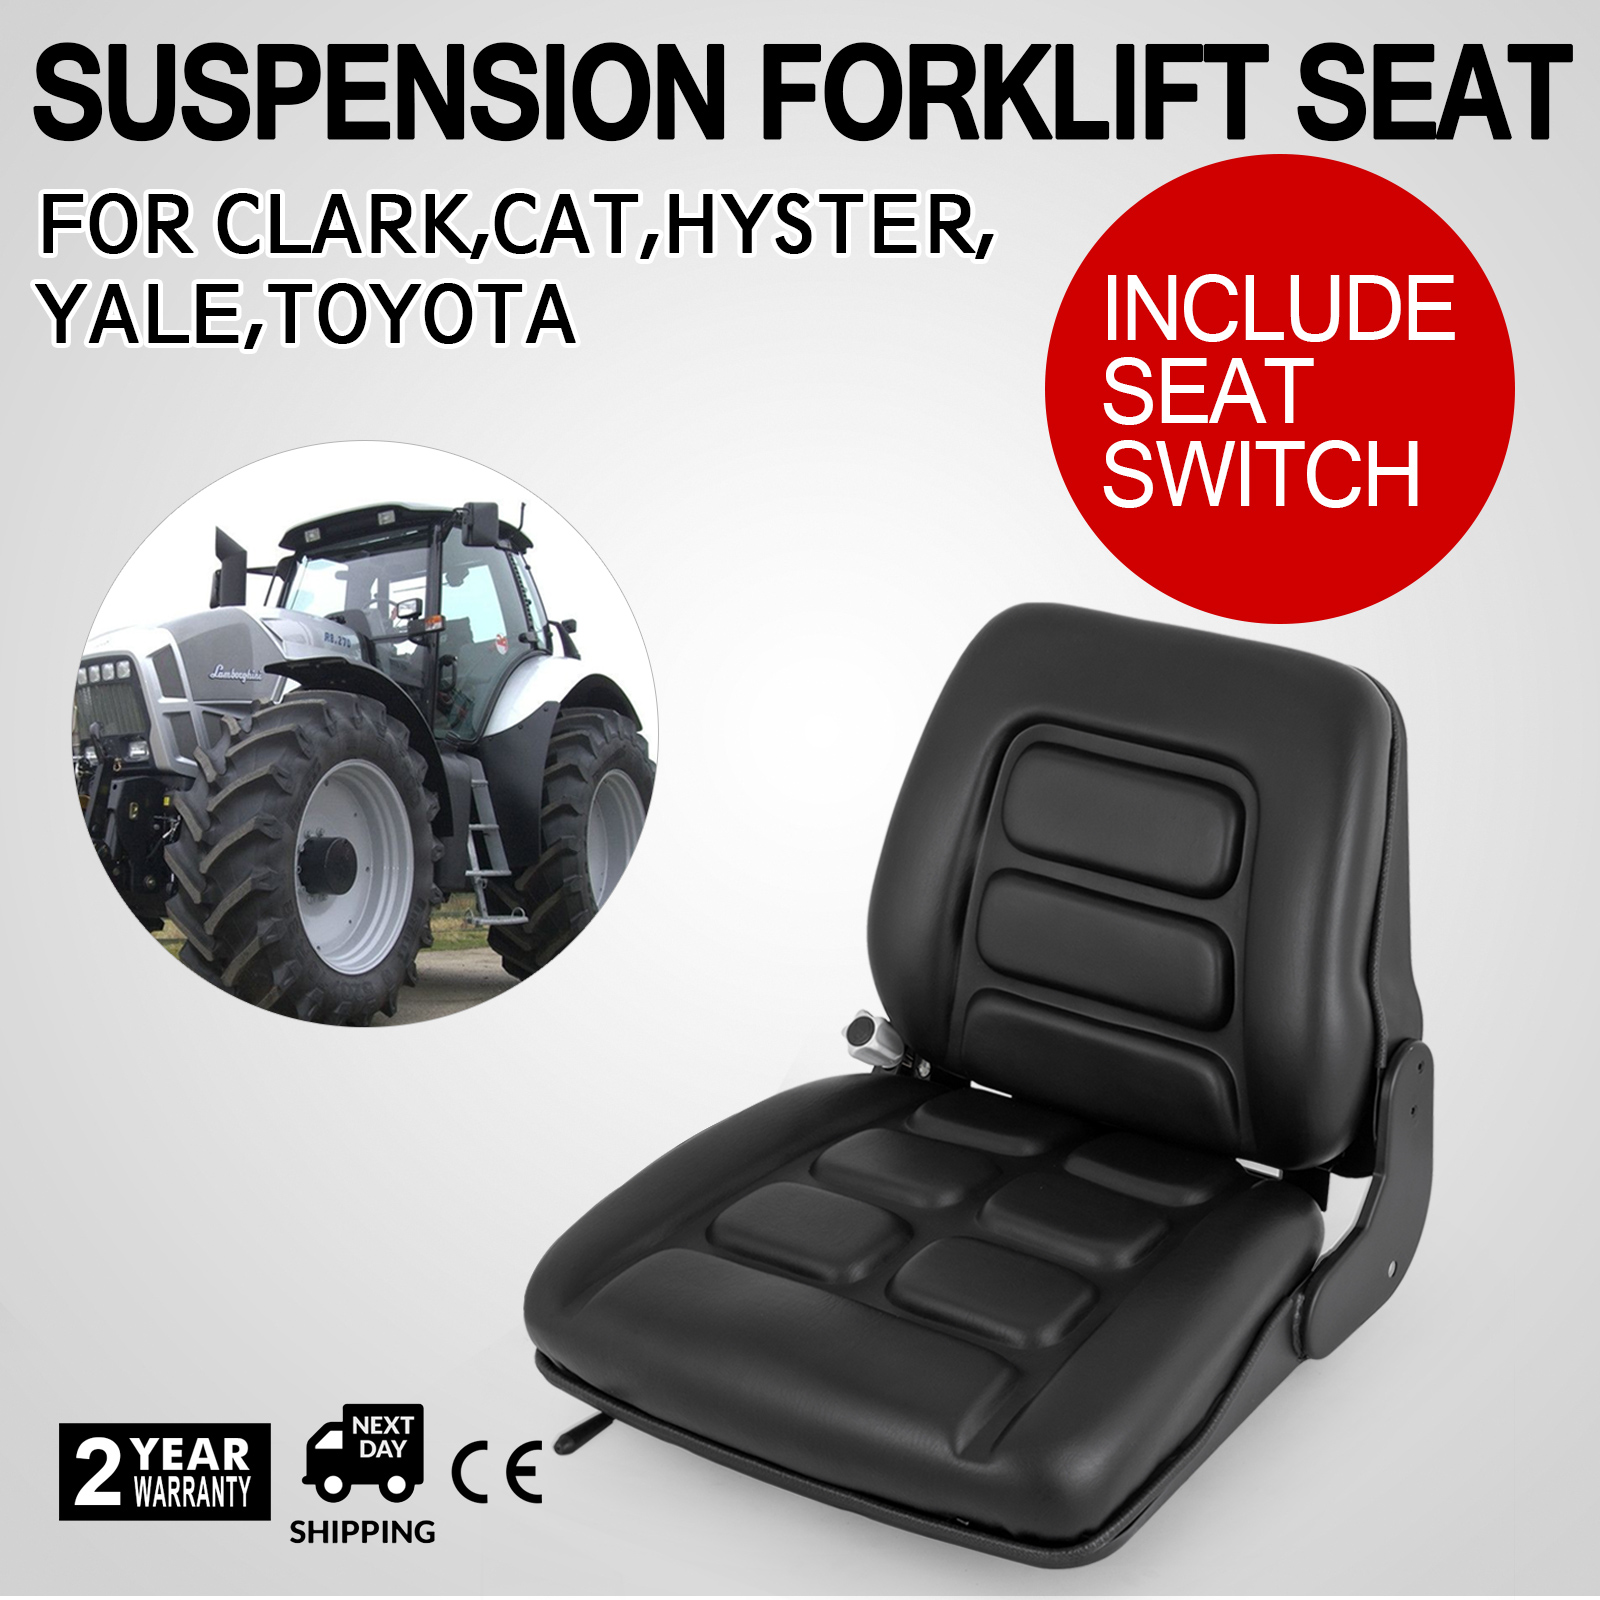 UNIVERSAL VINYL FORKLIFT SUSPENSION SEAT FIT CLARK HYSTER TOYOTA HIGH NEW SELL